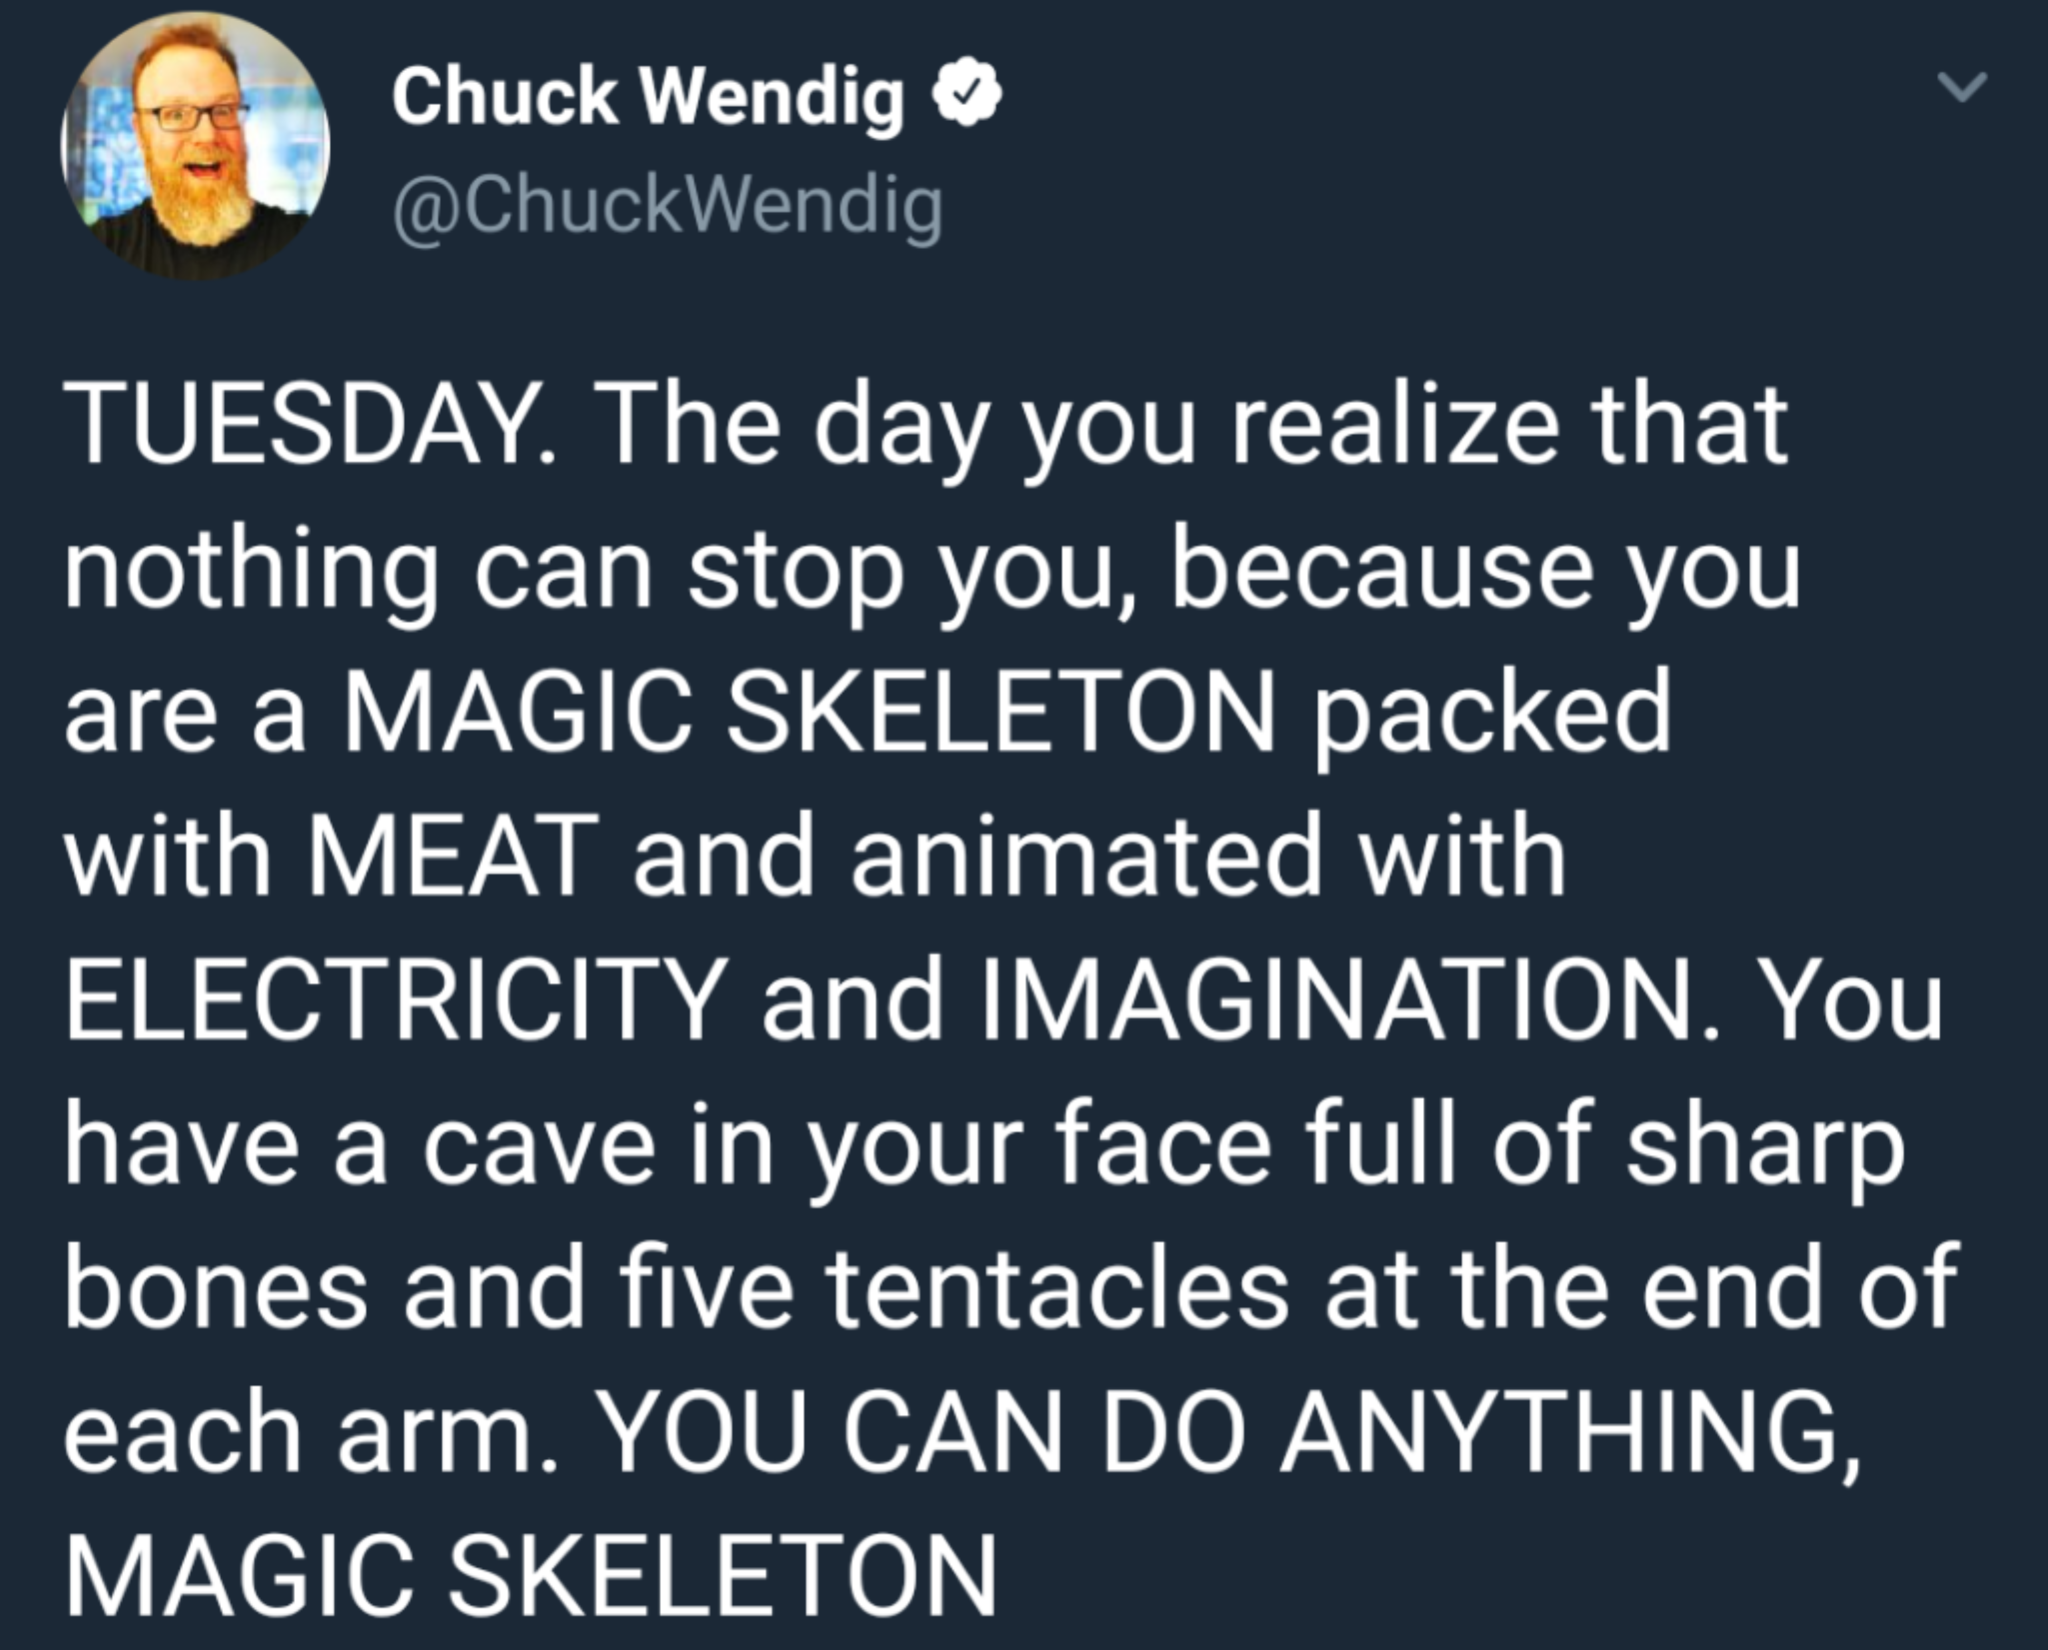 you can do anything magic skeleton - Chuck Wendig Tuesday. The day you realize that nothing can stop you, because you are a Magic Skeleton packed with Meat and animated with Electricity and Imagination. You have a cave in your face full of sharp bones and